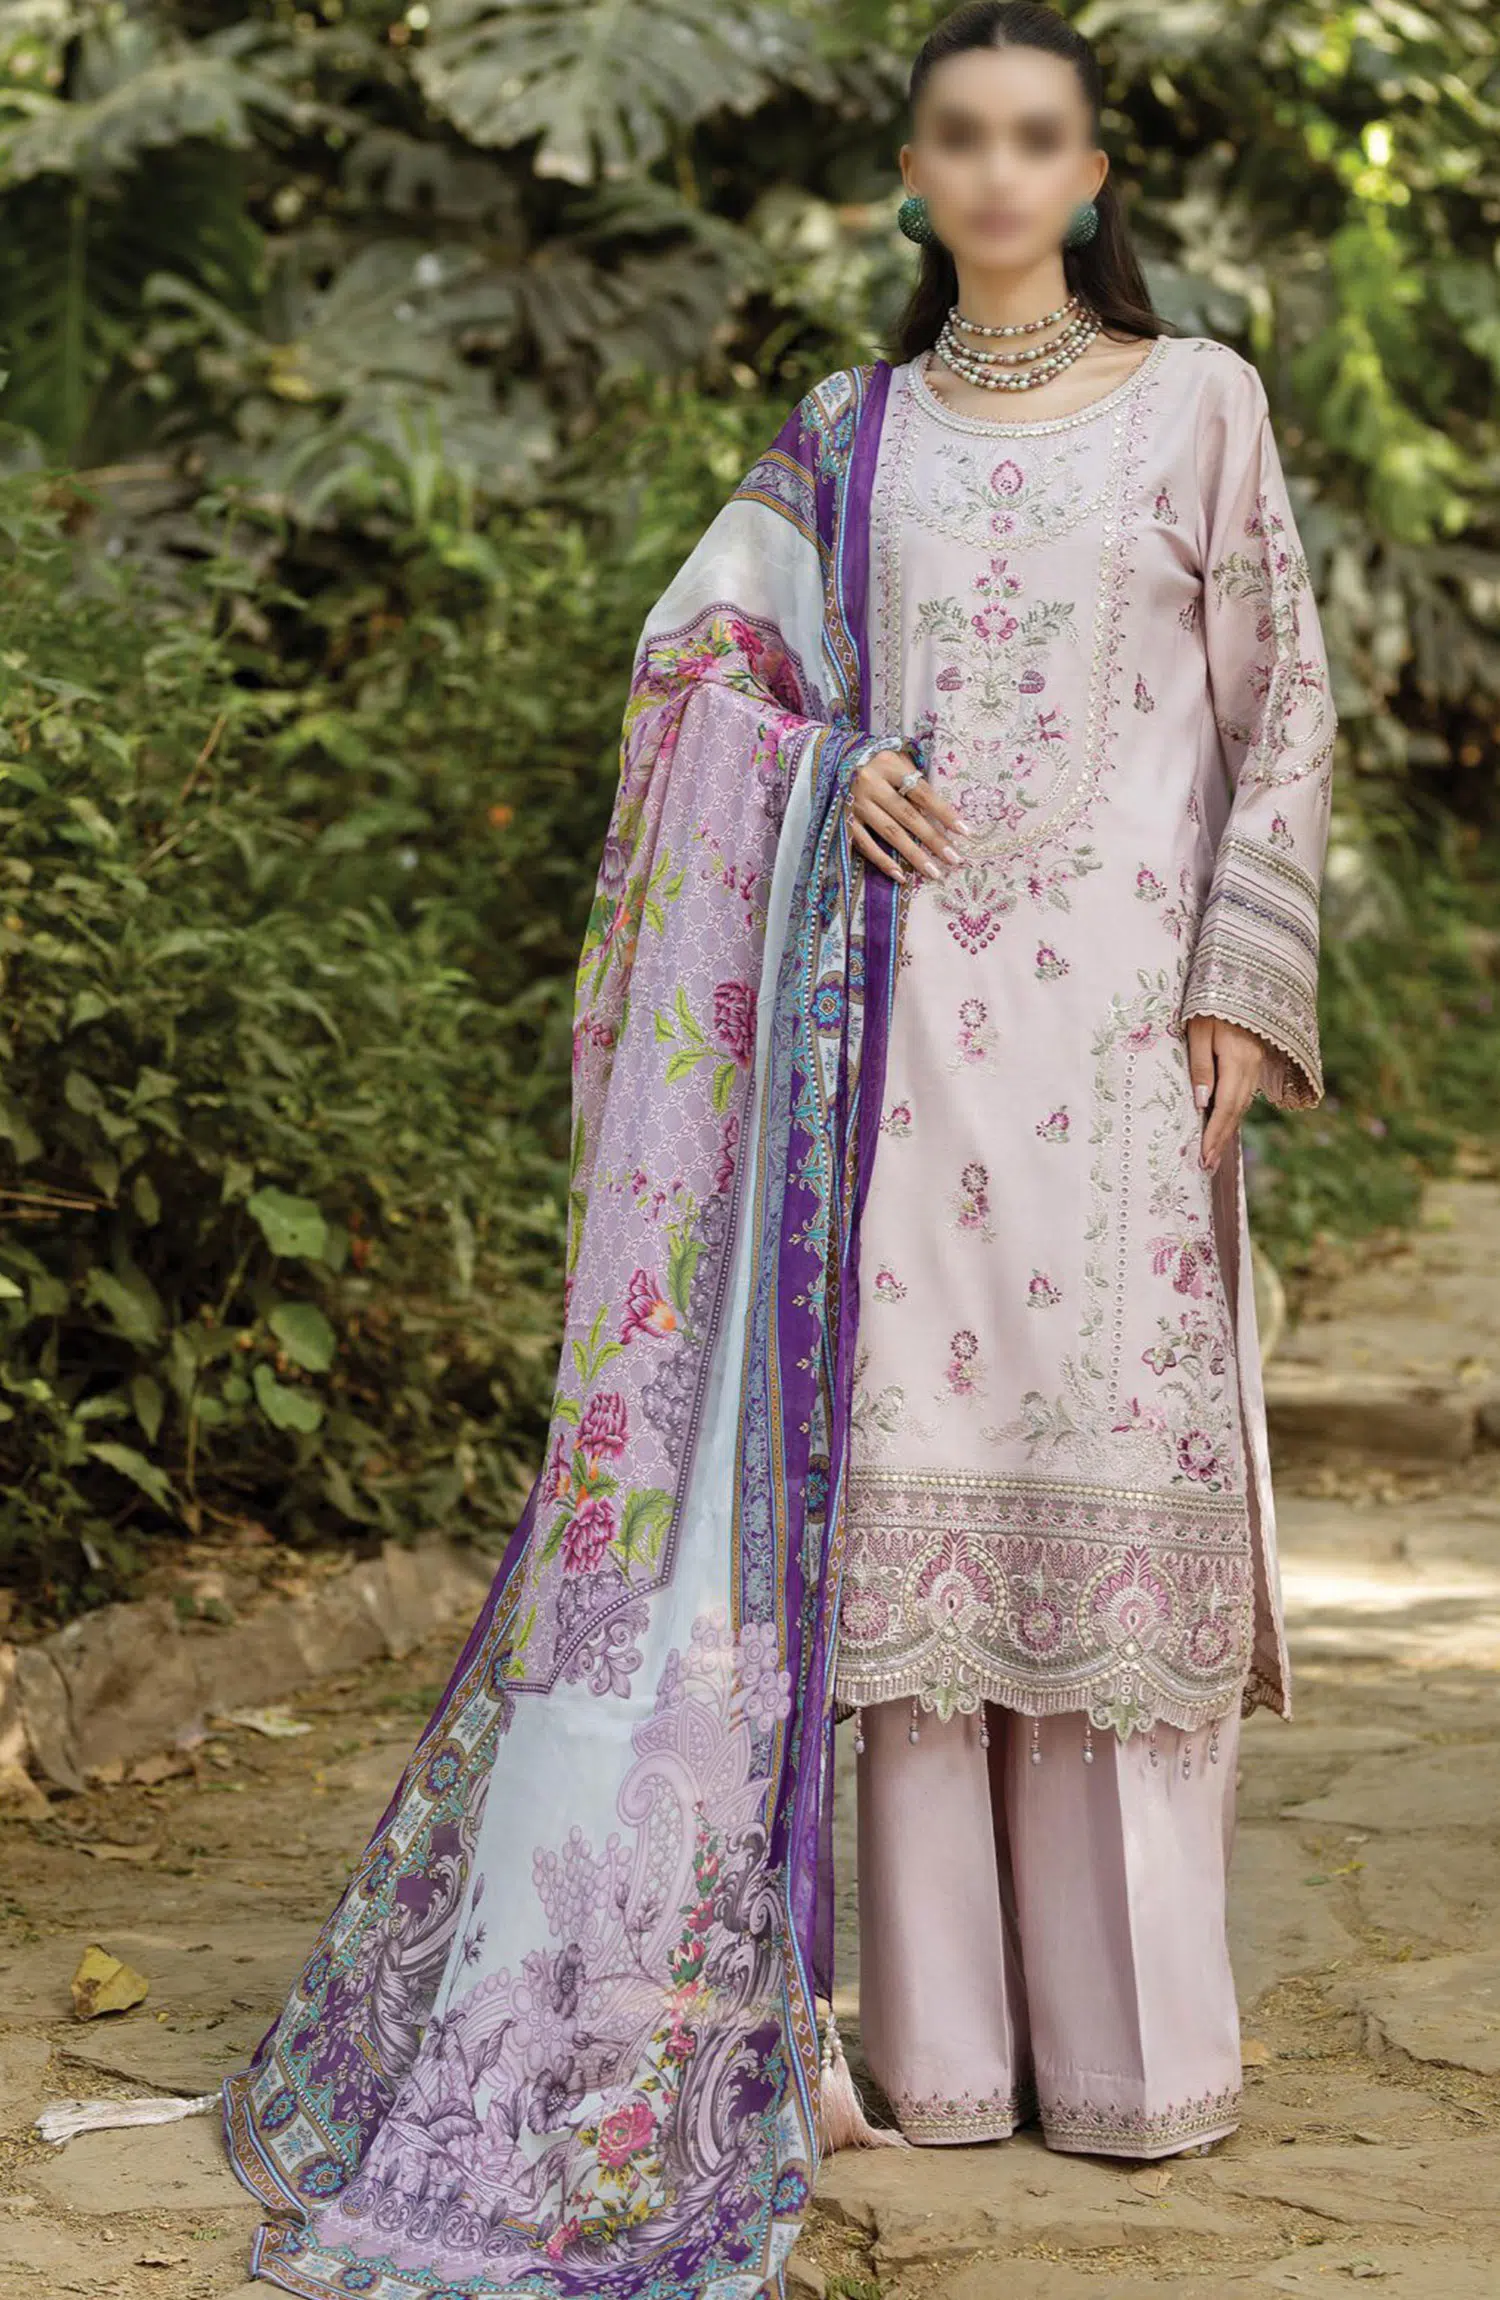 Jaan-E-Adaa Lawn Collection By Imrozia - IPL - 05 AFSANA E DIL